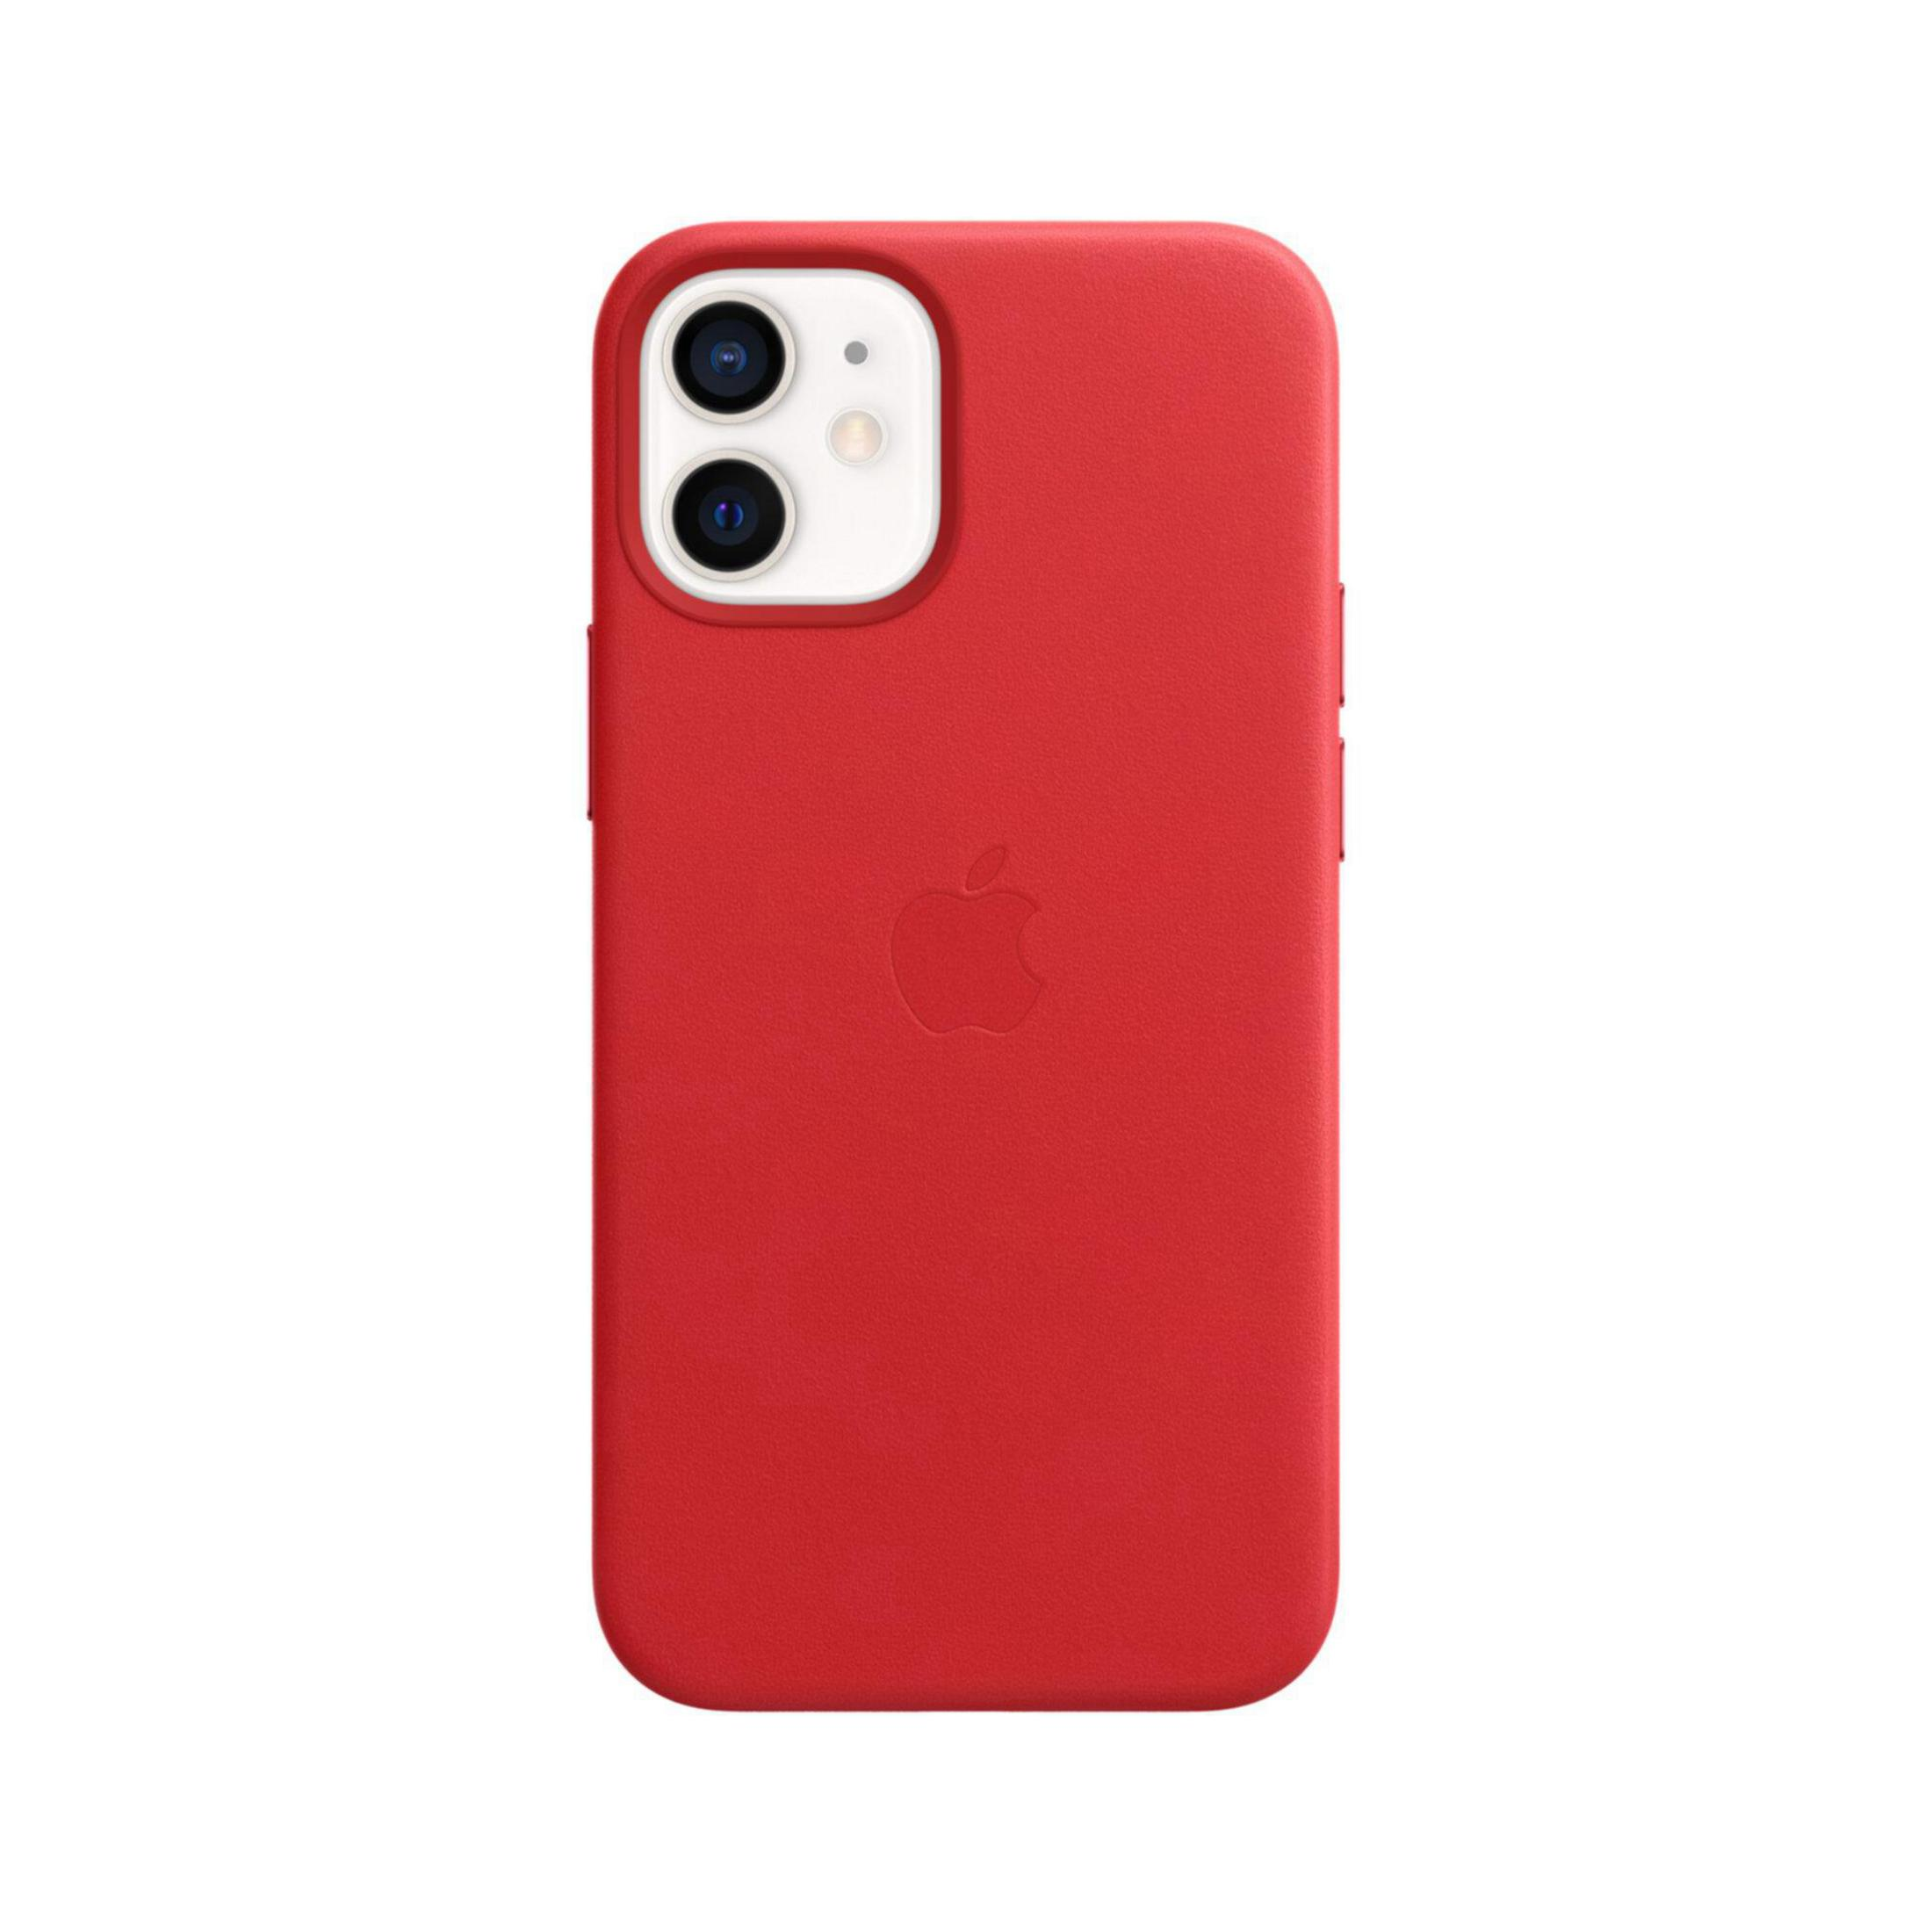 APPLE IPhone Backcover, Apple, Red 12 IPHONE12MLEDER-(PRODUCT)RED, MHK73ZM/A Mini,